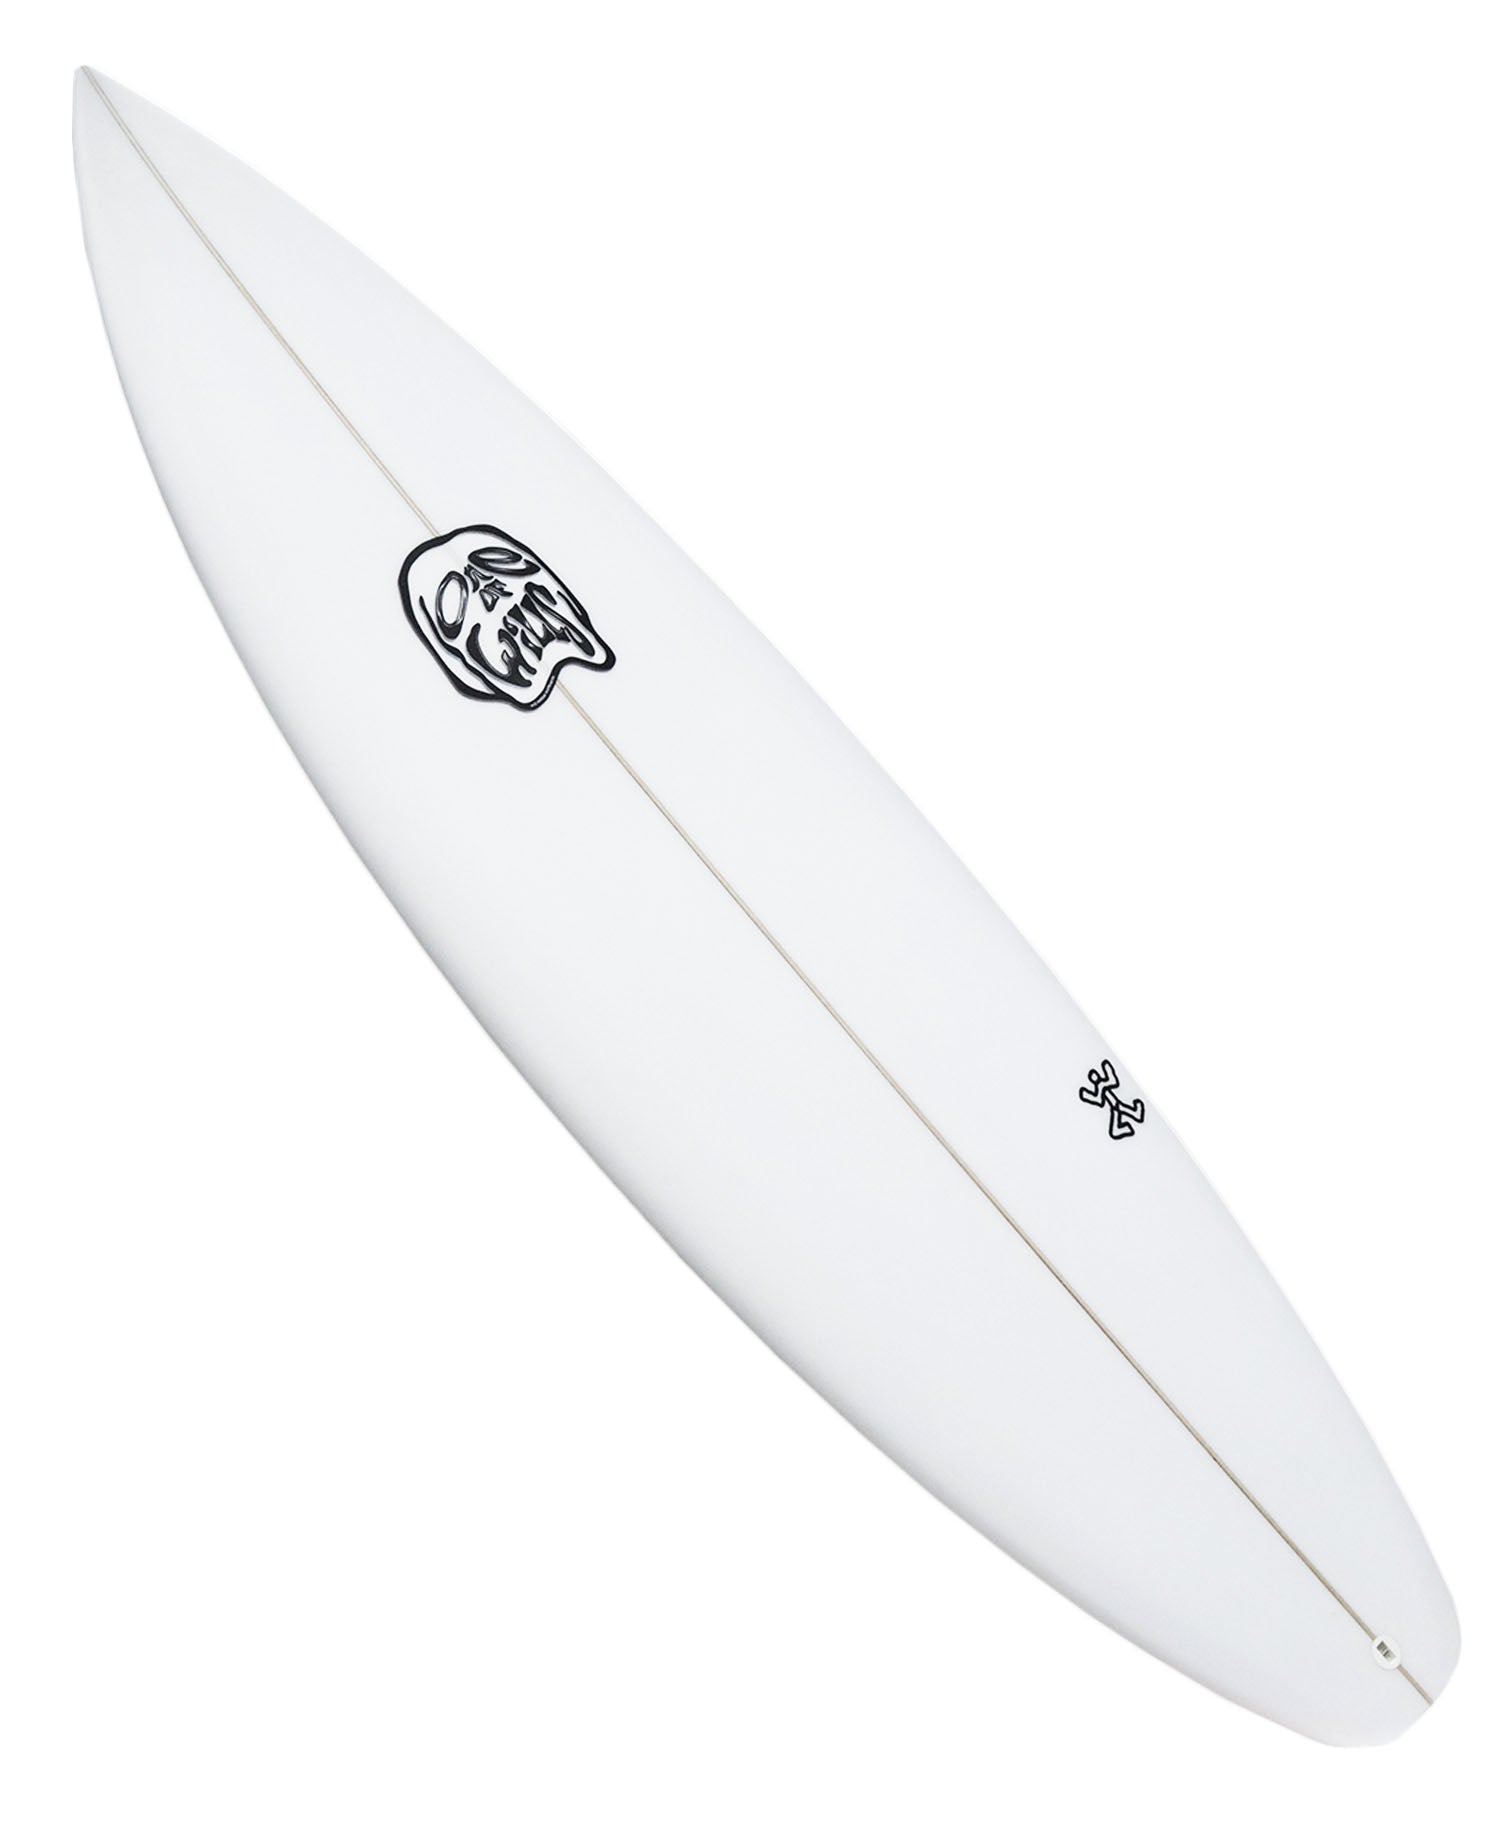 WILL WEBBER 'LIVE WIRE' SHORTBOARD